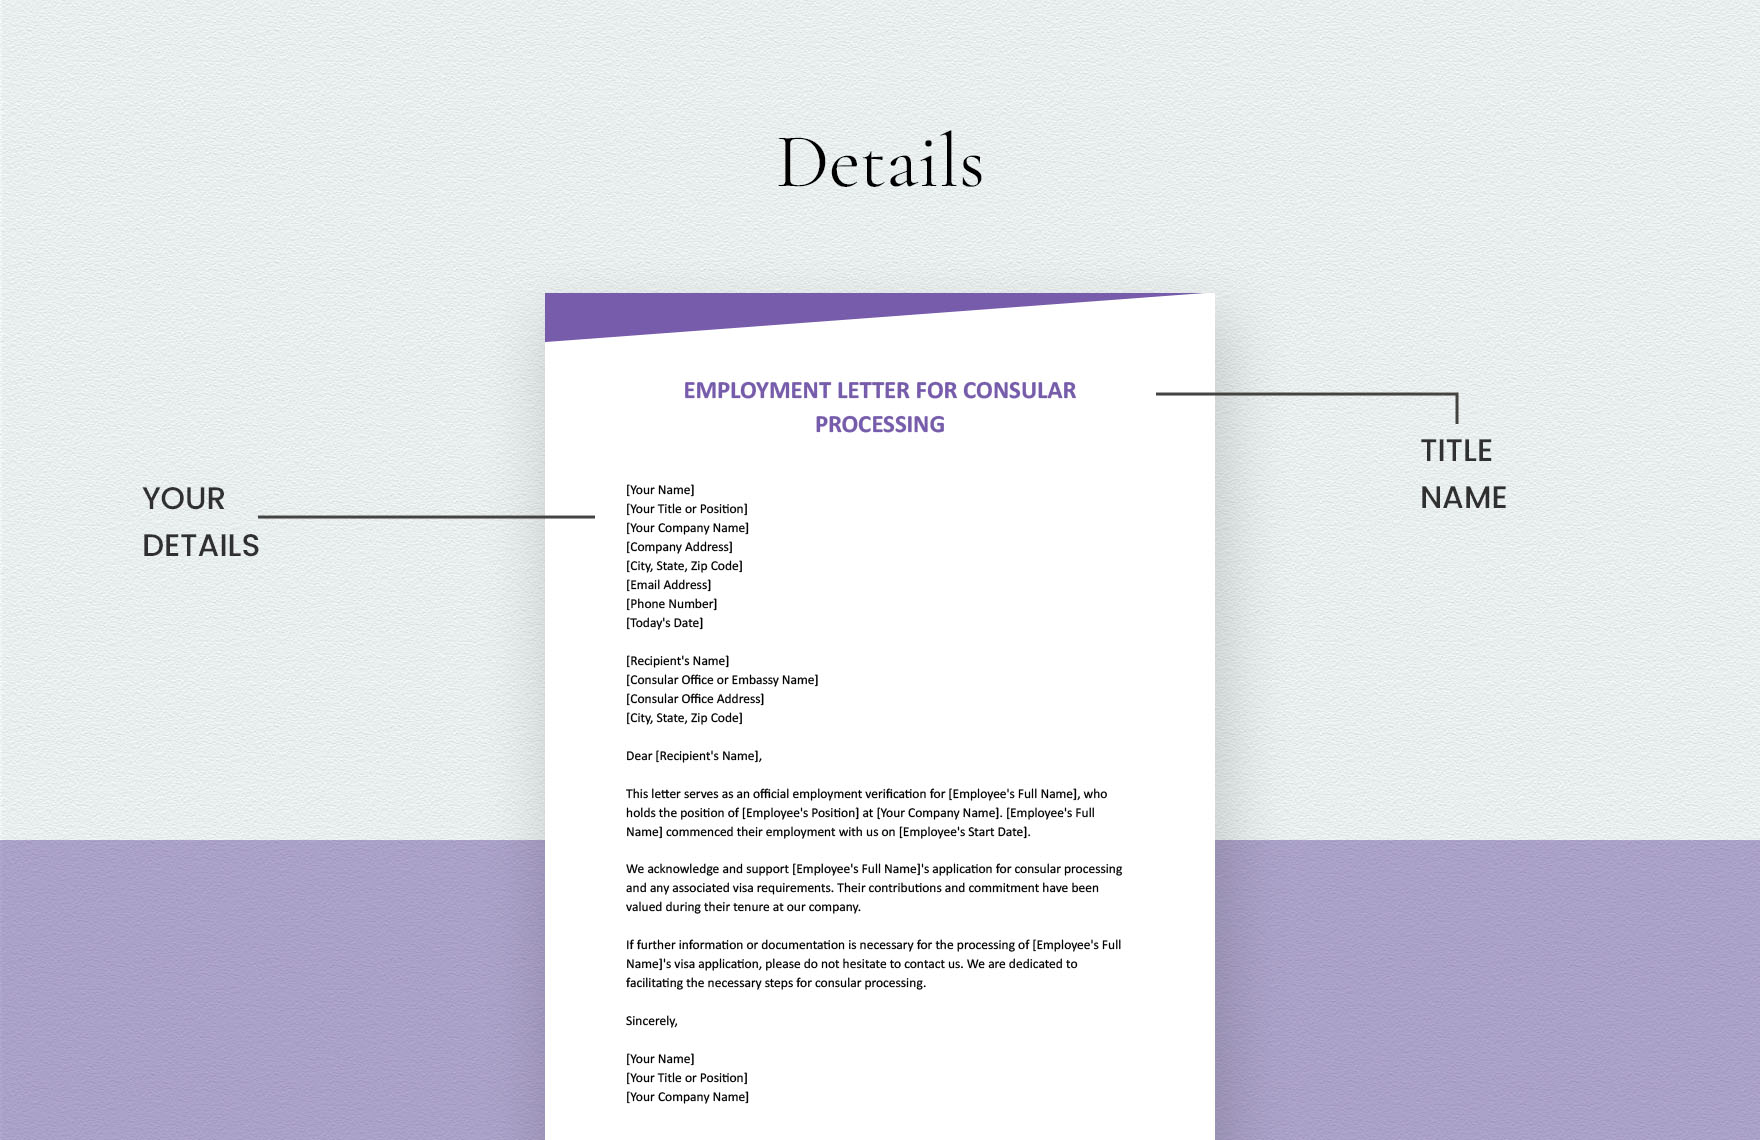 Employment Letter for Consular Processing